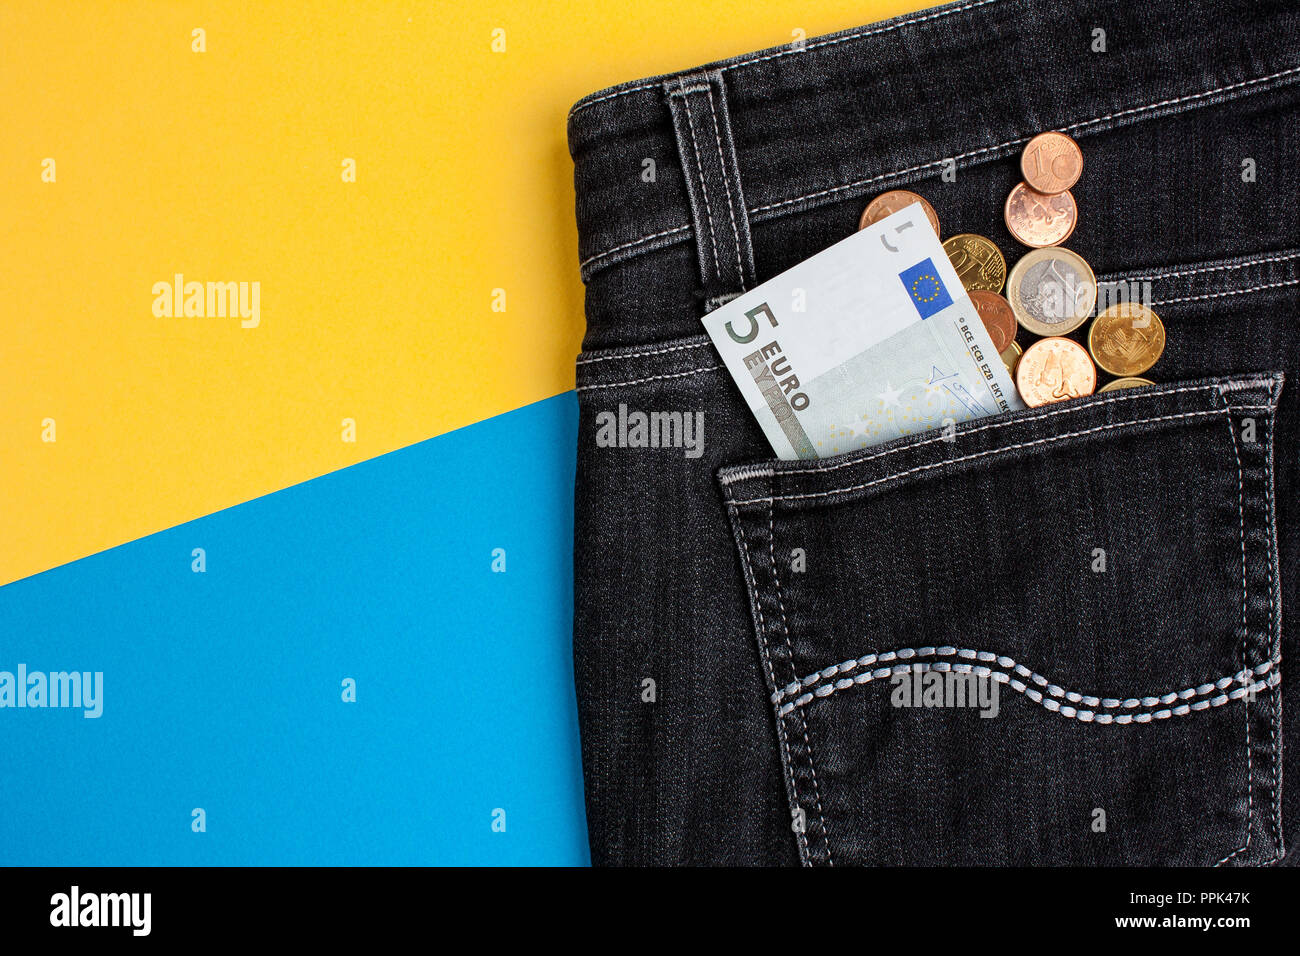 Euro banknote and coins in black jeans back pocket on yellow and blue background Stock Photo